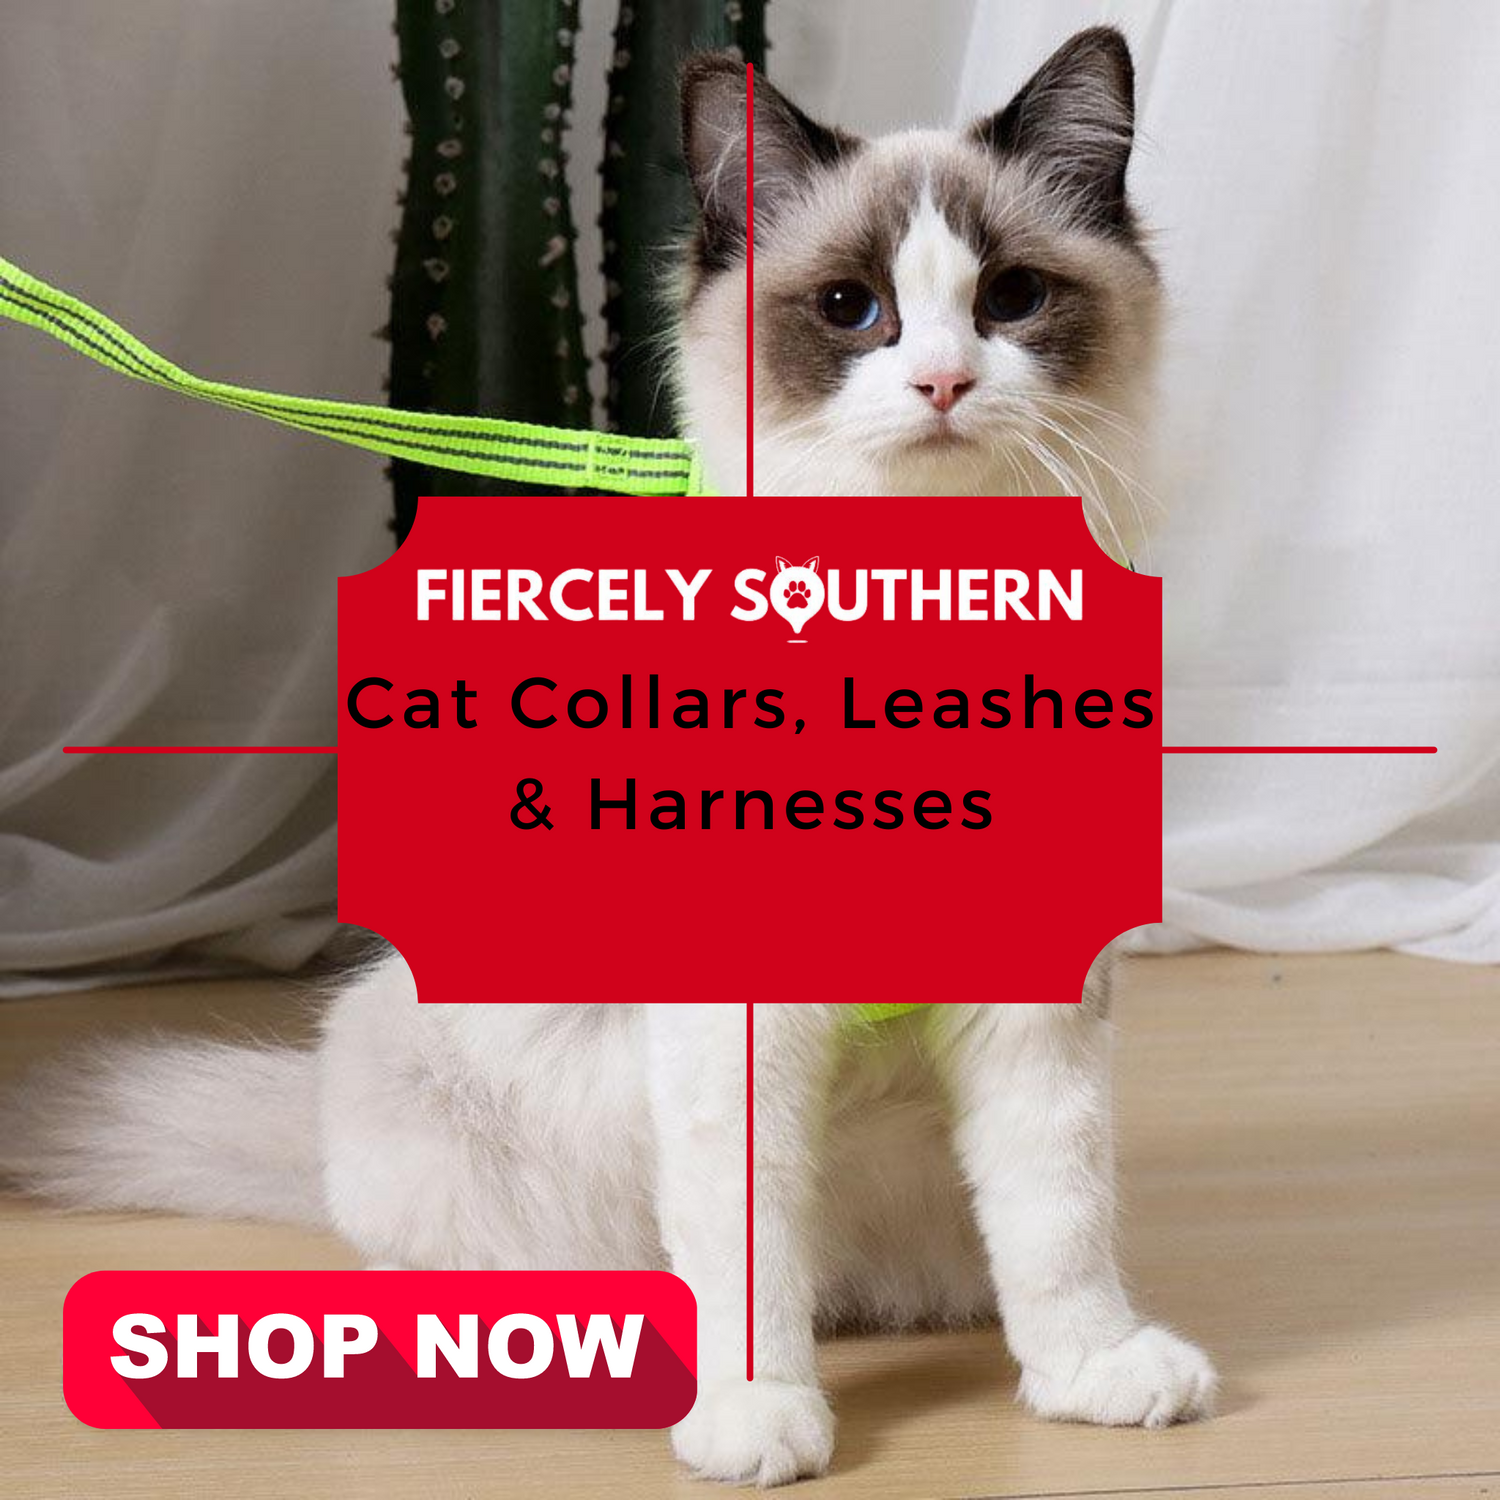 Cat Collars, Leashes & Harnesses - Fiercely Southern